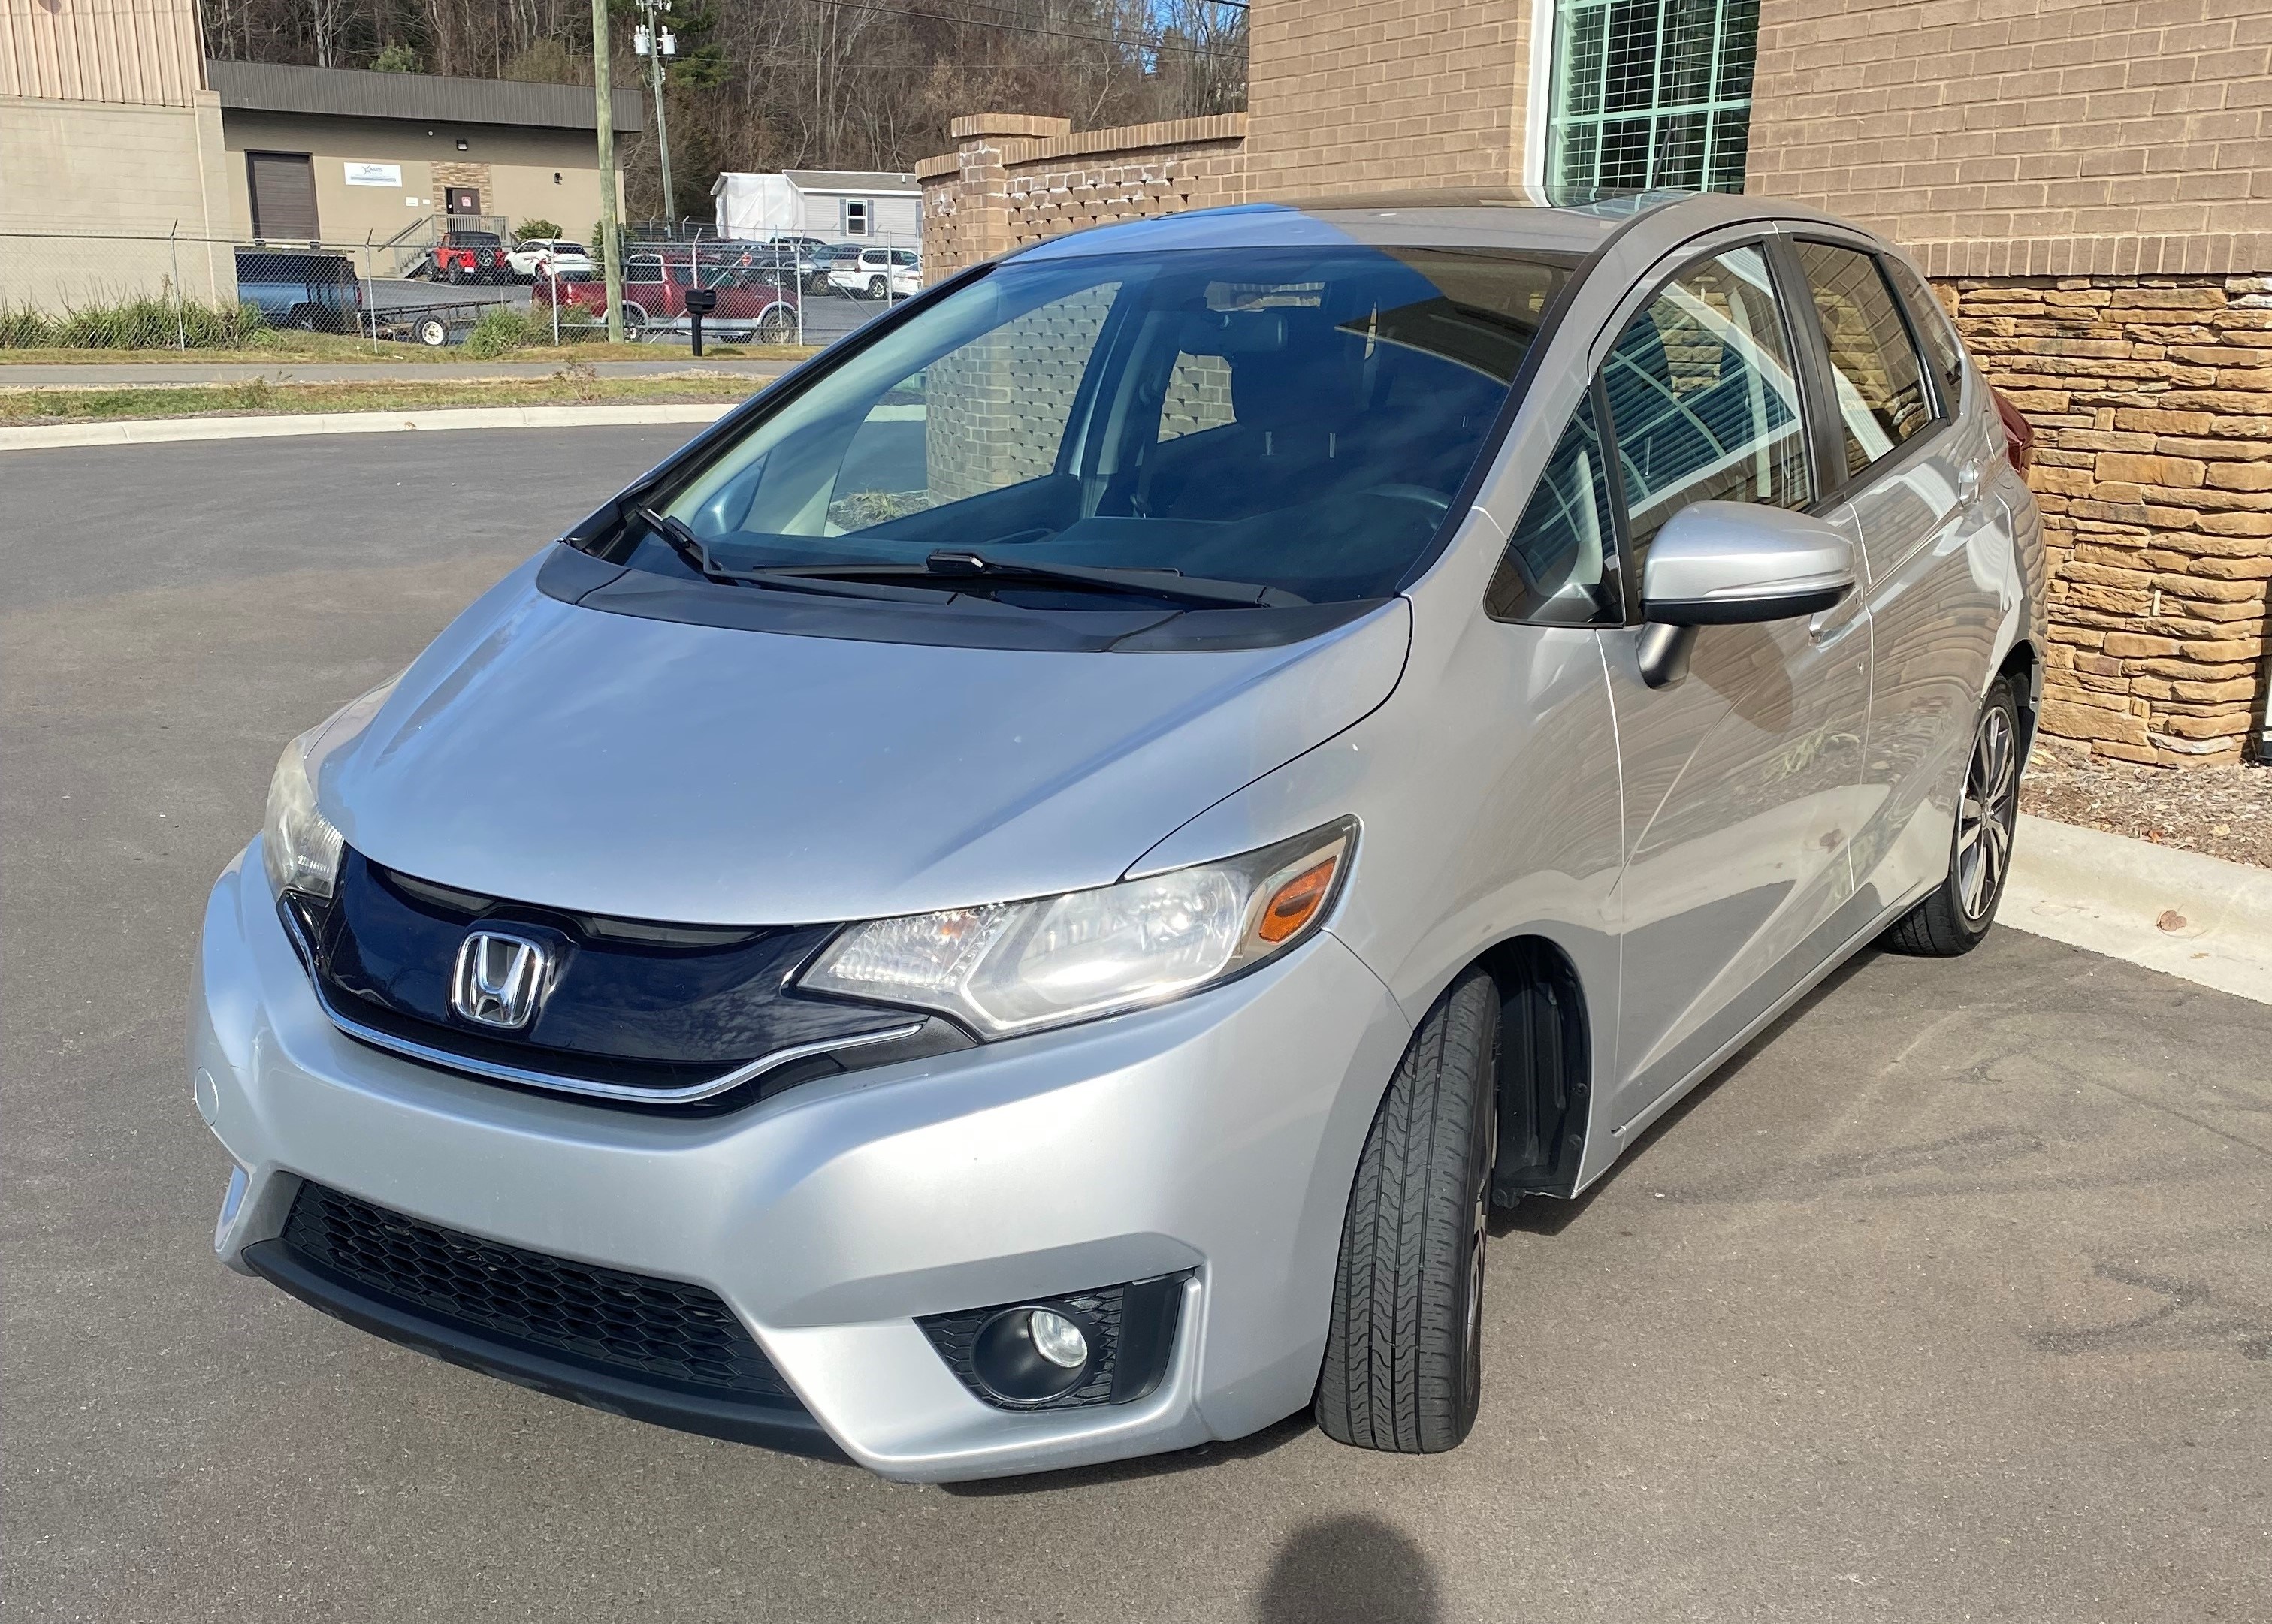 2016 HONDA FIT    $15,250  VIN:   JHMGK5H73GX045943 Mileage: 72,467  Features:  Hatchback, 5D EX 1.5L I4, Automatic Transmission, A/C, Power Seats, Windows, Locks and Mirrors, Tilt, Cruise, AM/FM/MP3 Stereo, Back up Camera, Navigation System, Alloy Wheels.